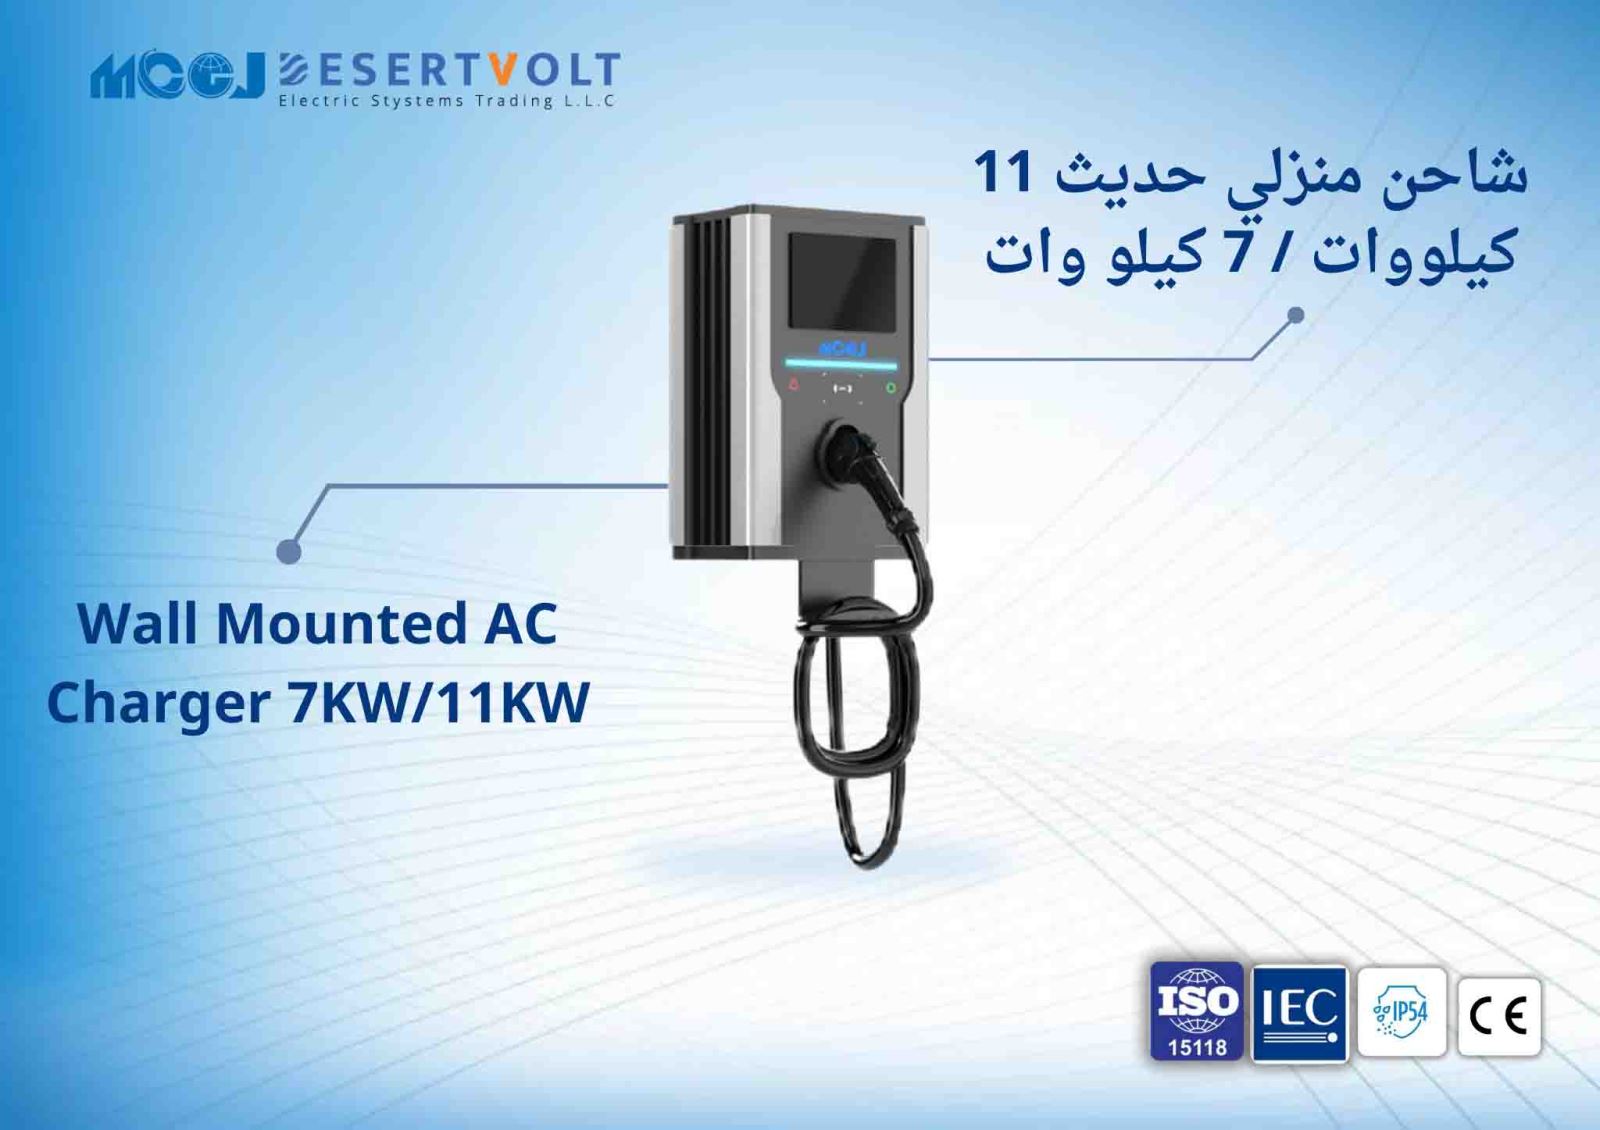 Wall Mounted AC Charger 7KW/11KW